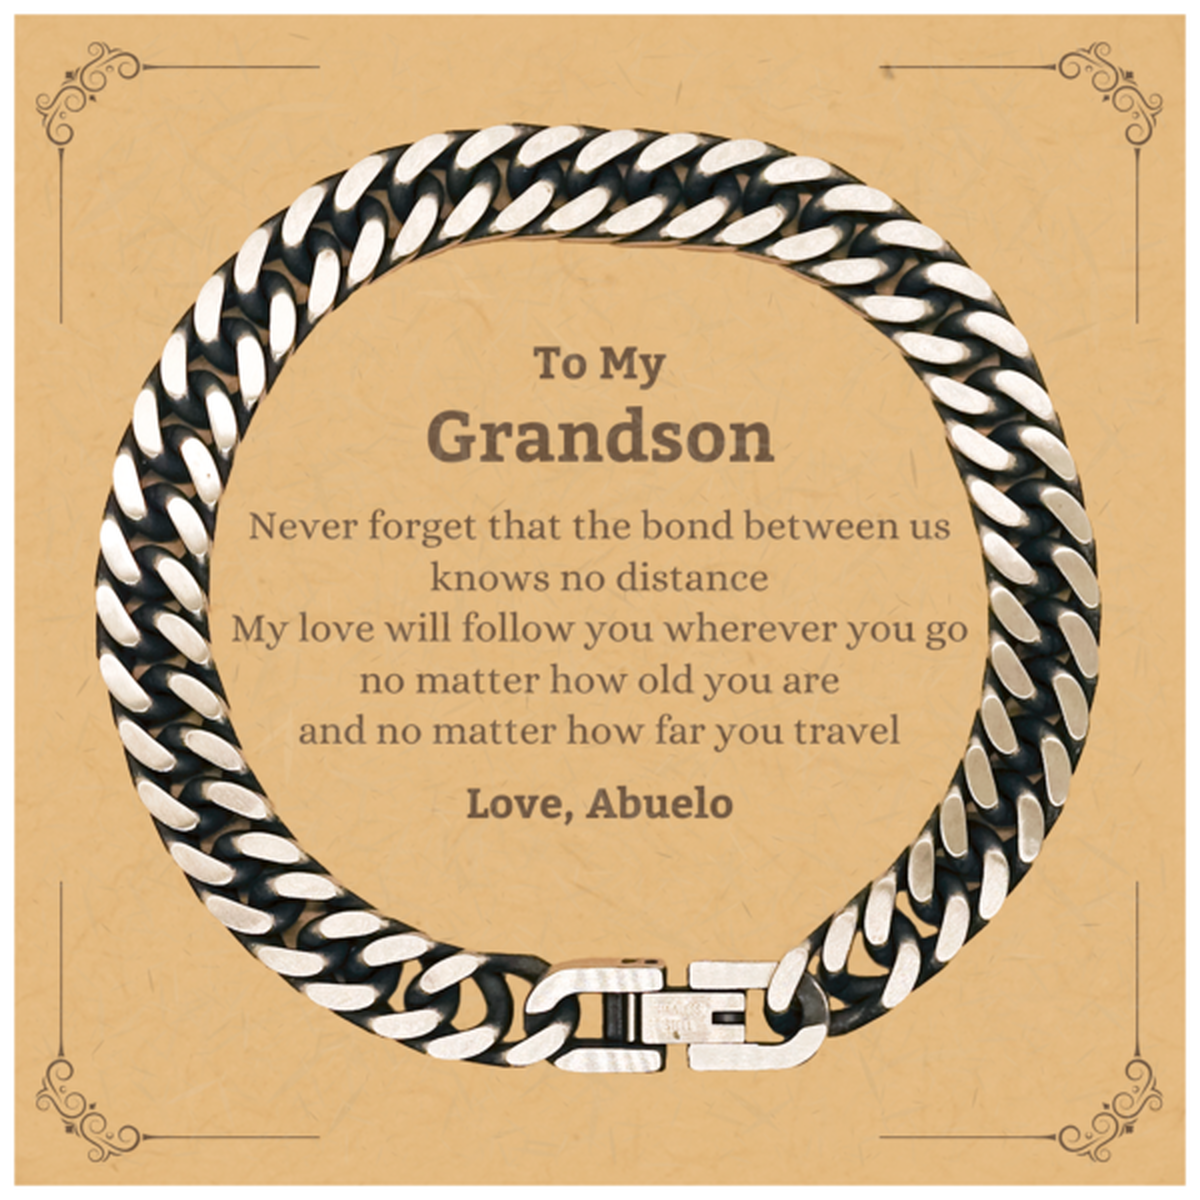 Grandson Birthday Gifts from Abuelo, Adjustable Cuban Link Chain Bracelet for Grandson Christmas Graduation Unique Gifts Grandson Never forget that the bond between us knows no distance. Love, Abuelo